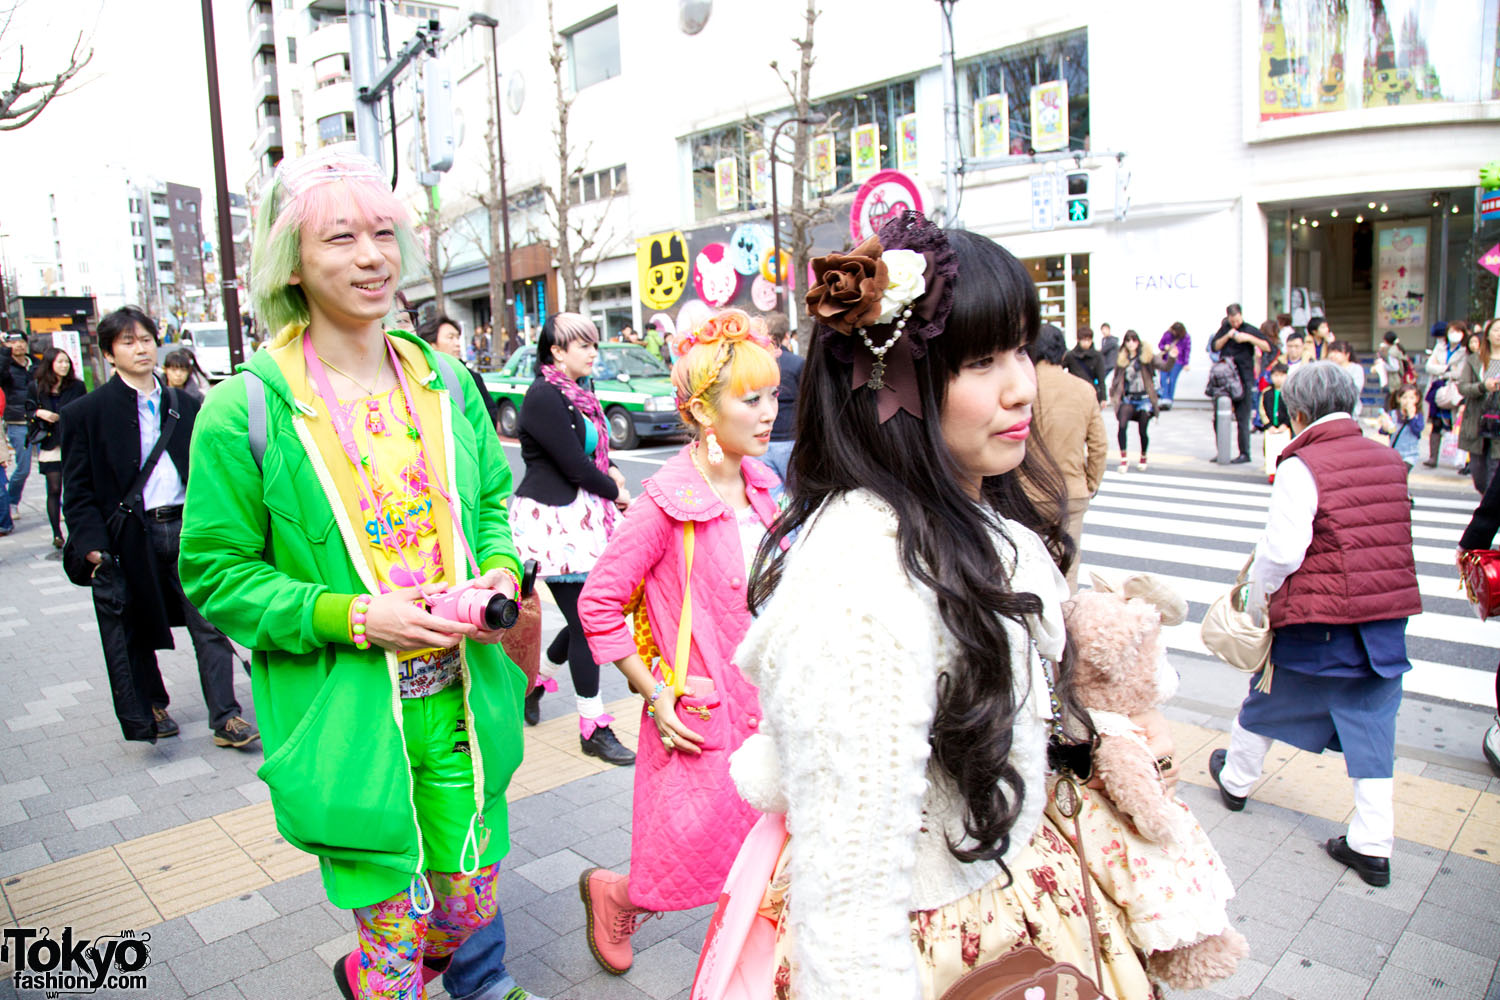 Download this Harajuku Fashion Walk Pictures picture